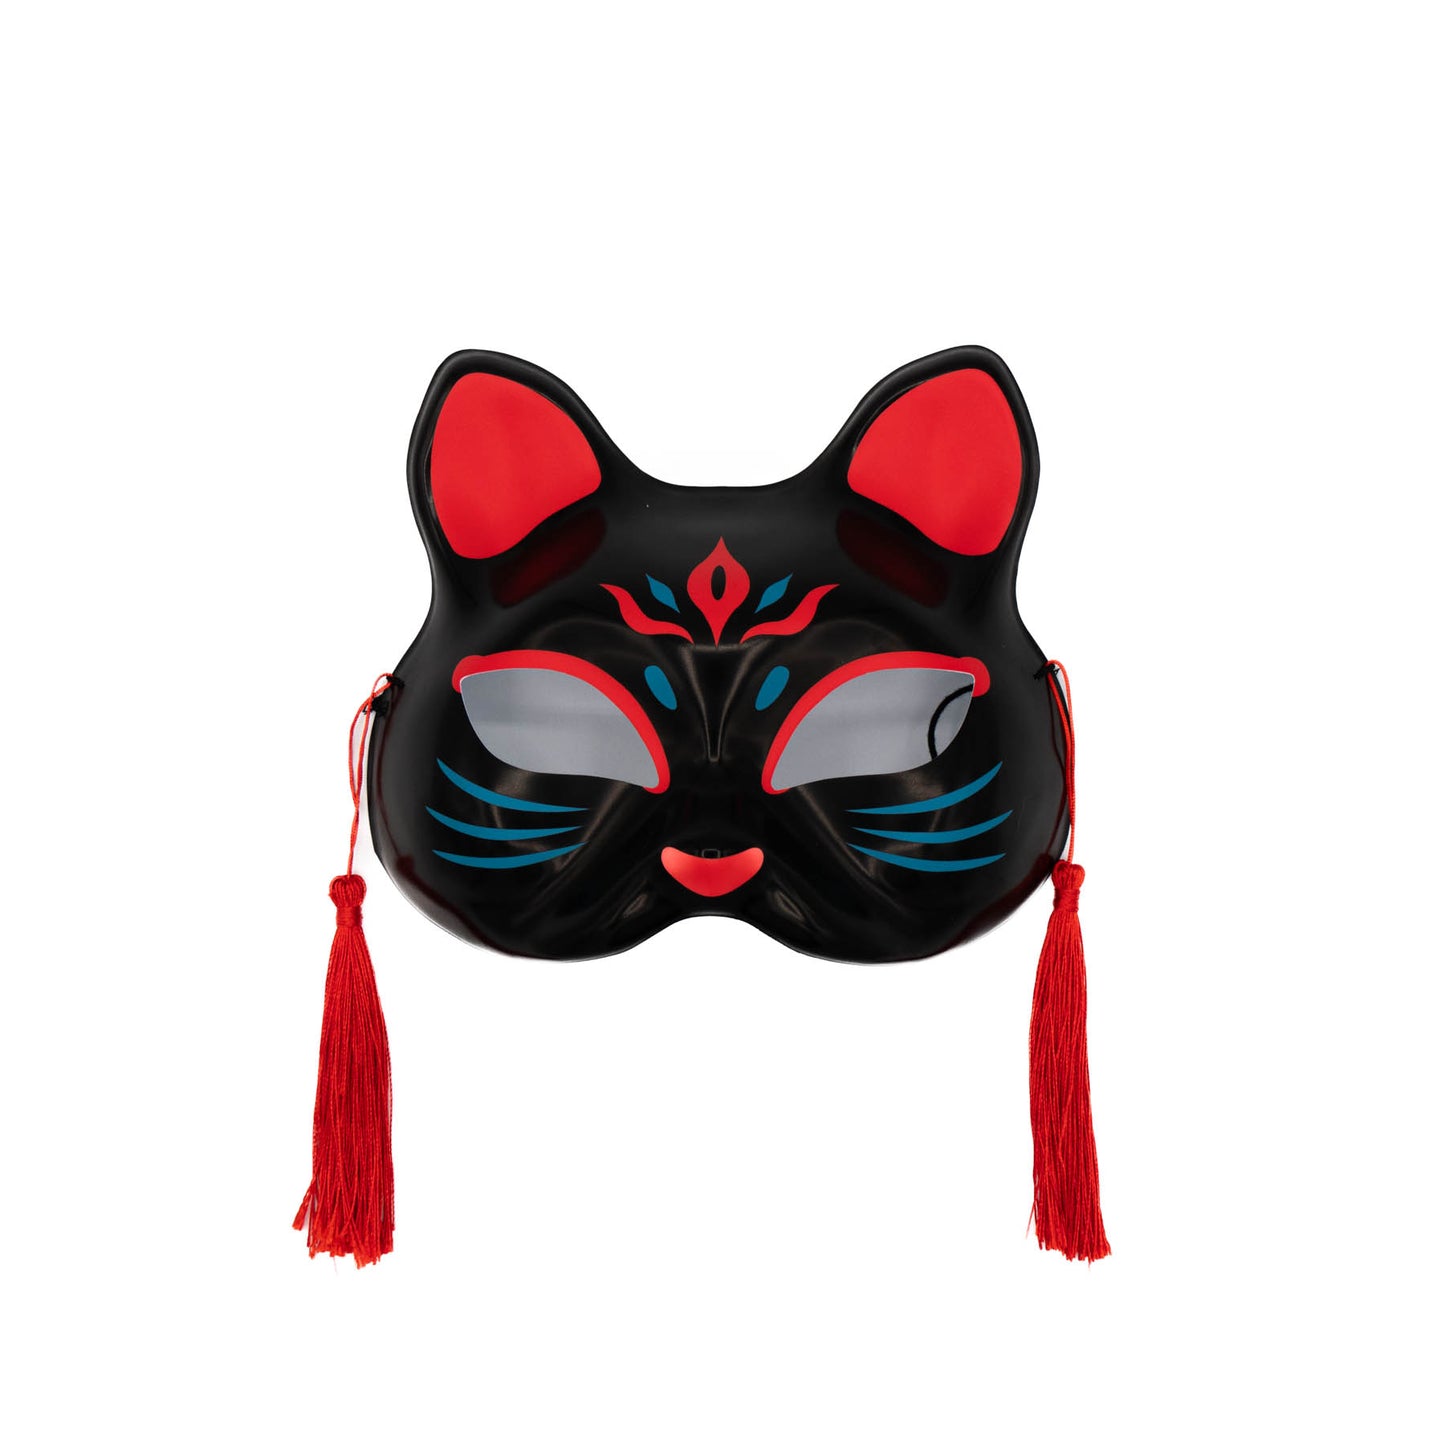 Japanese Cat Mask - Red and Blue